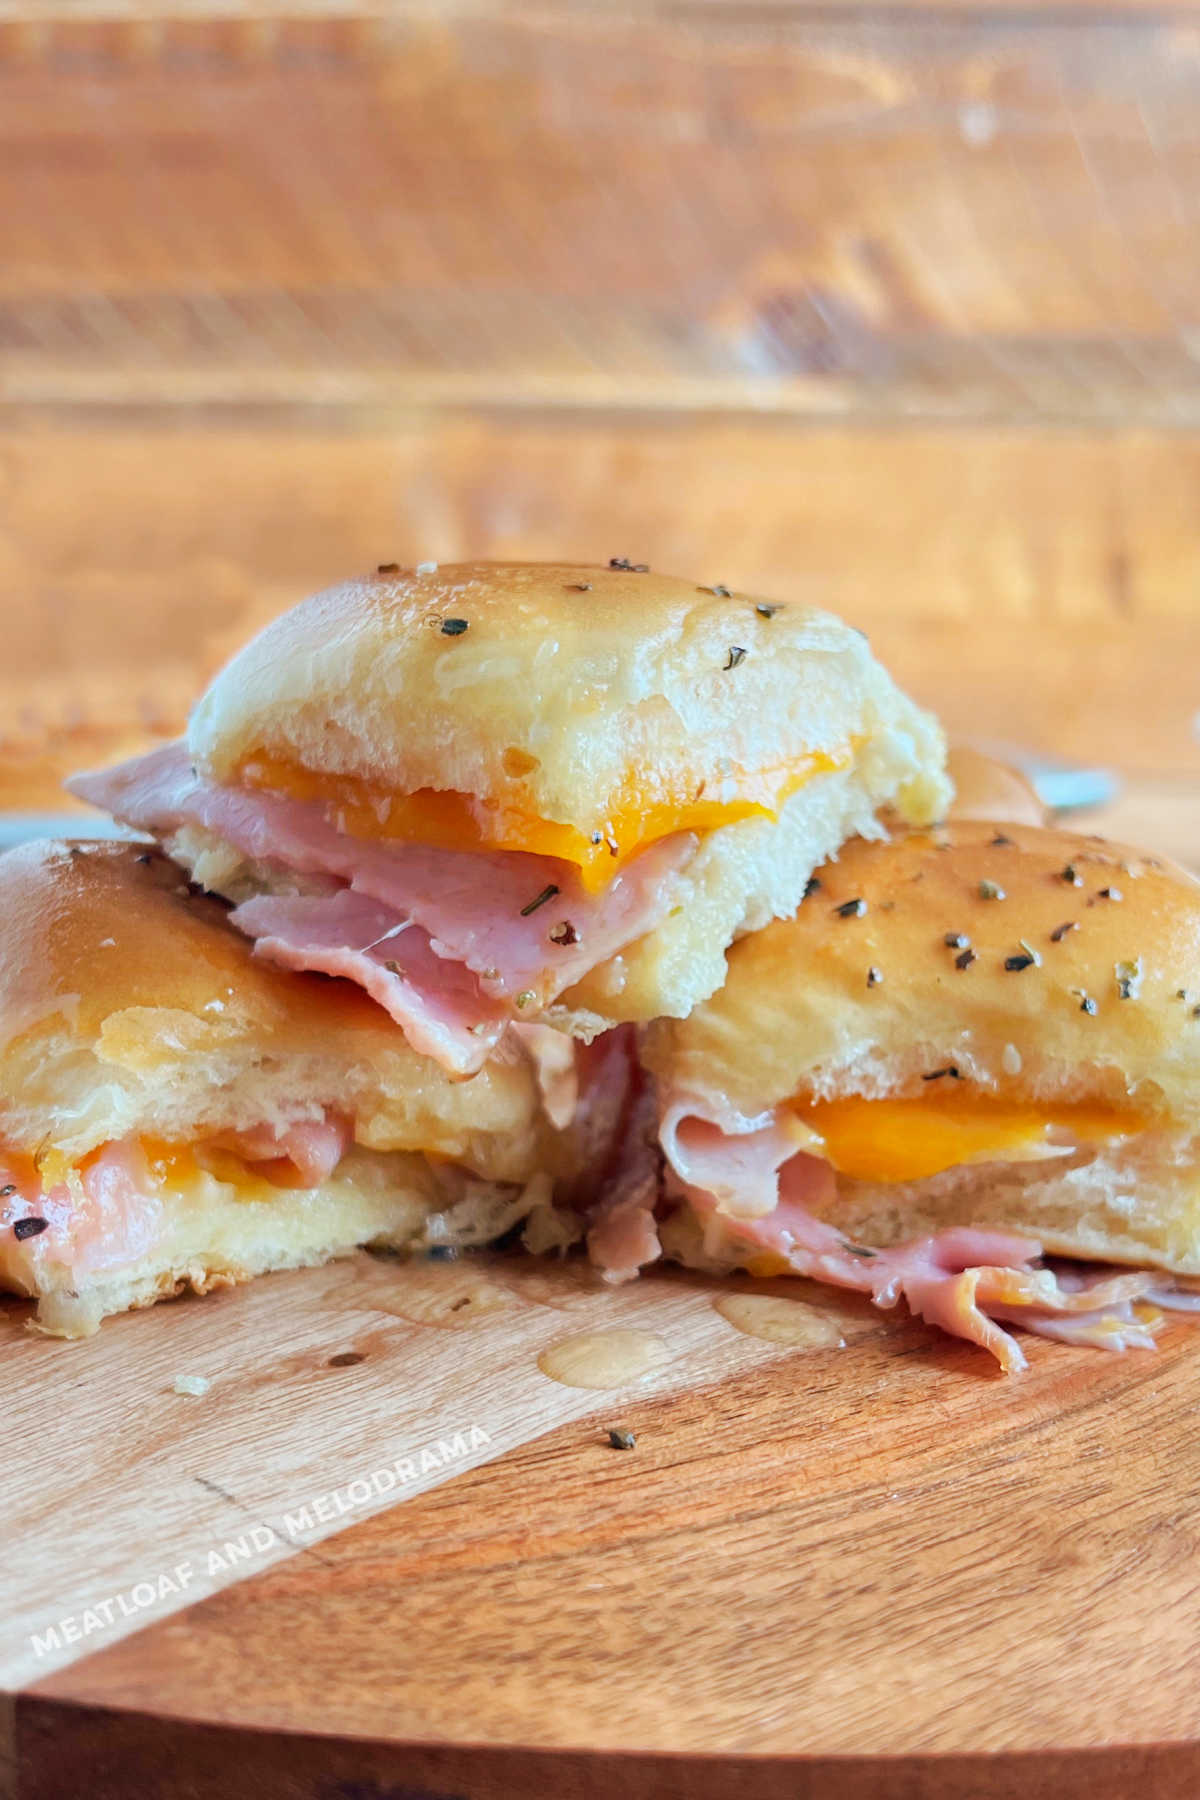 baked ham and cheese sandwiches made with leftover ham and cheddar cheese